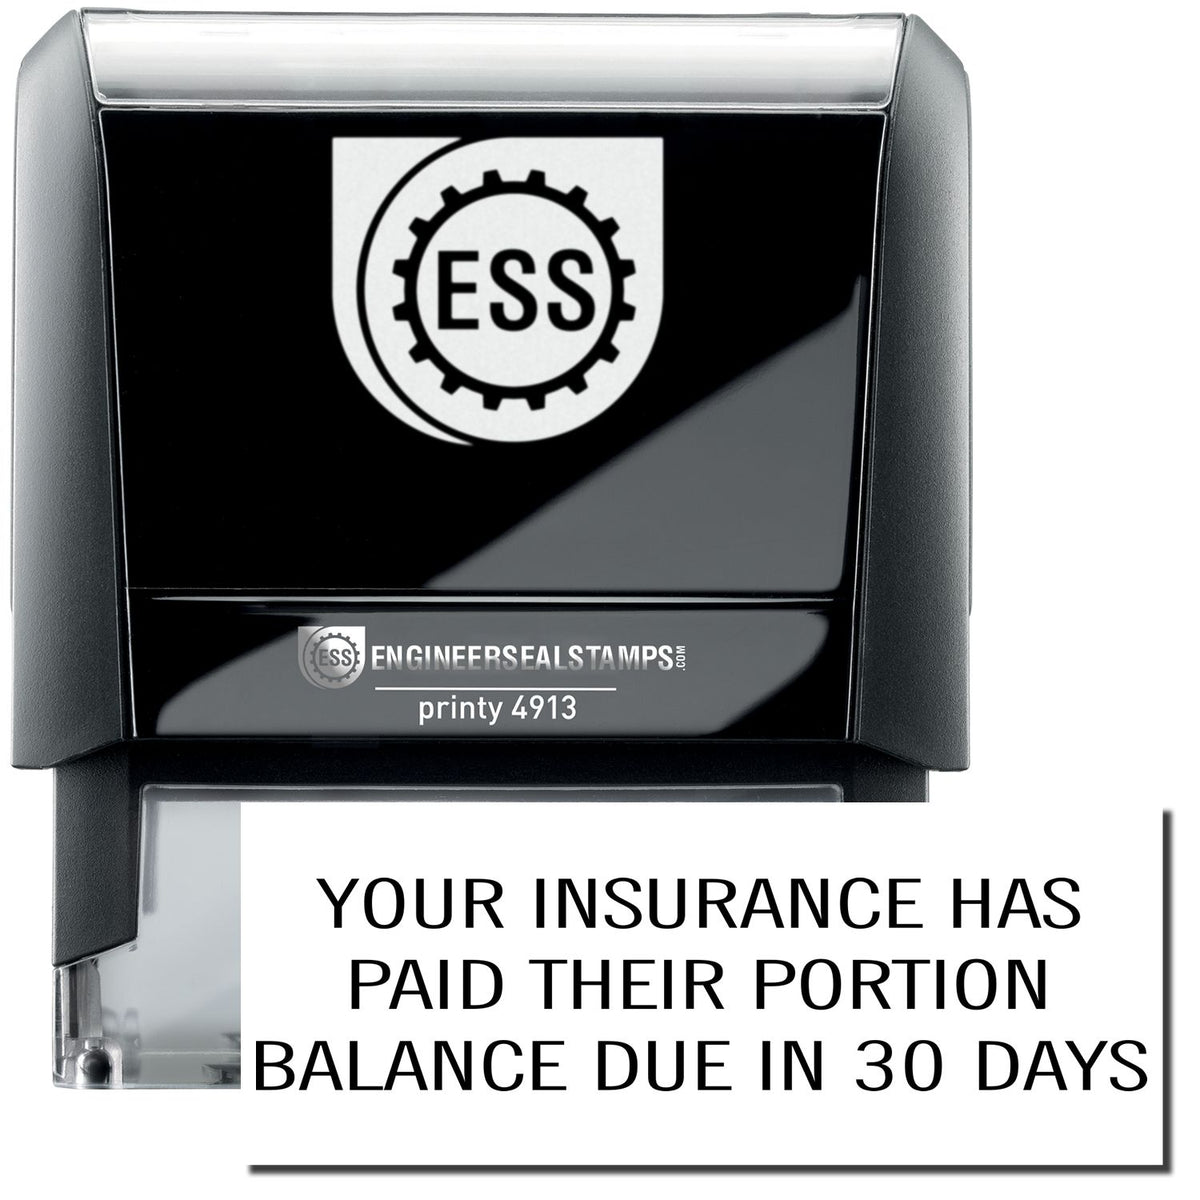 A self-inking stamp with a stamped image showing how the text &quot;YOUR INSURANCE HAS PAID THEIR PORTION BALANCE DUE IN 30 DAYS&quot; in a large font is displayed by it after stamping.